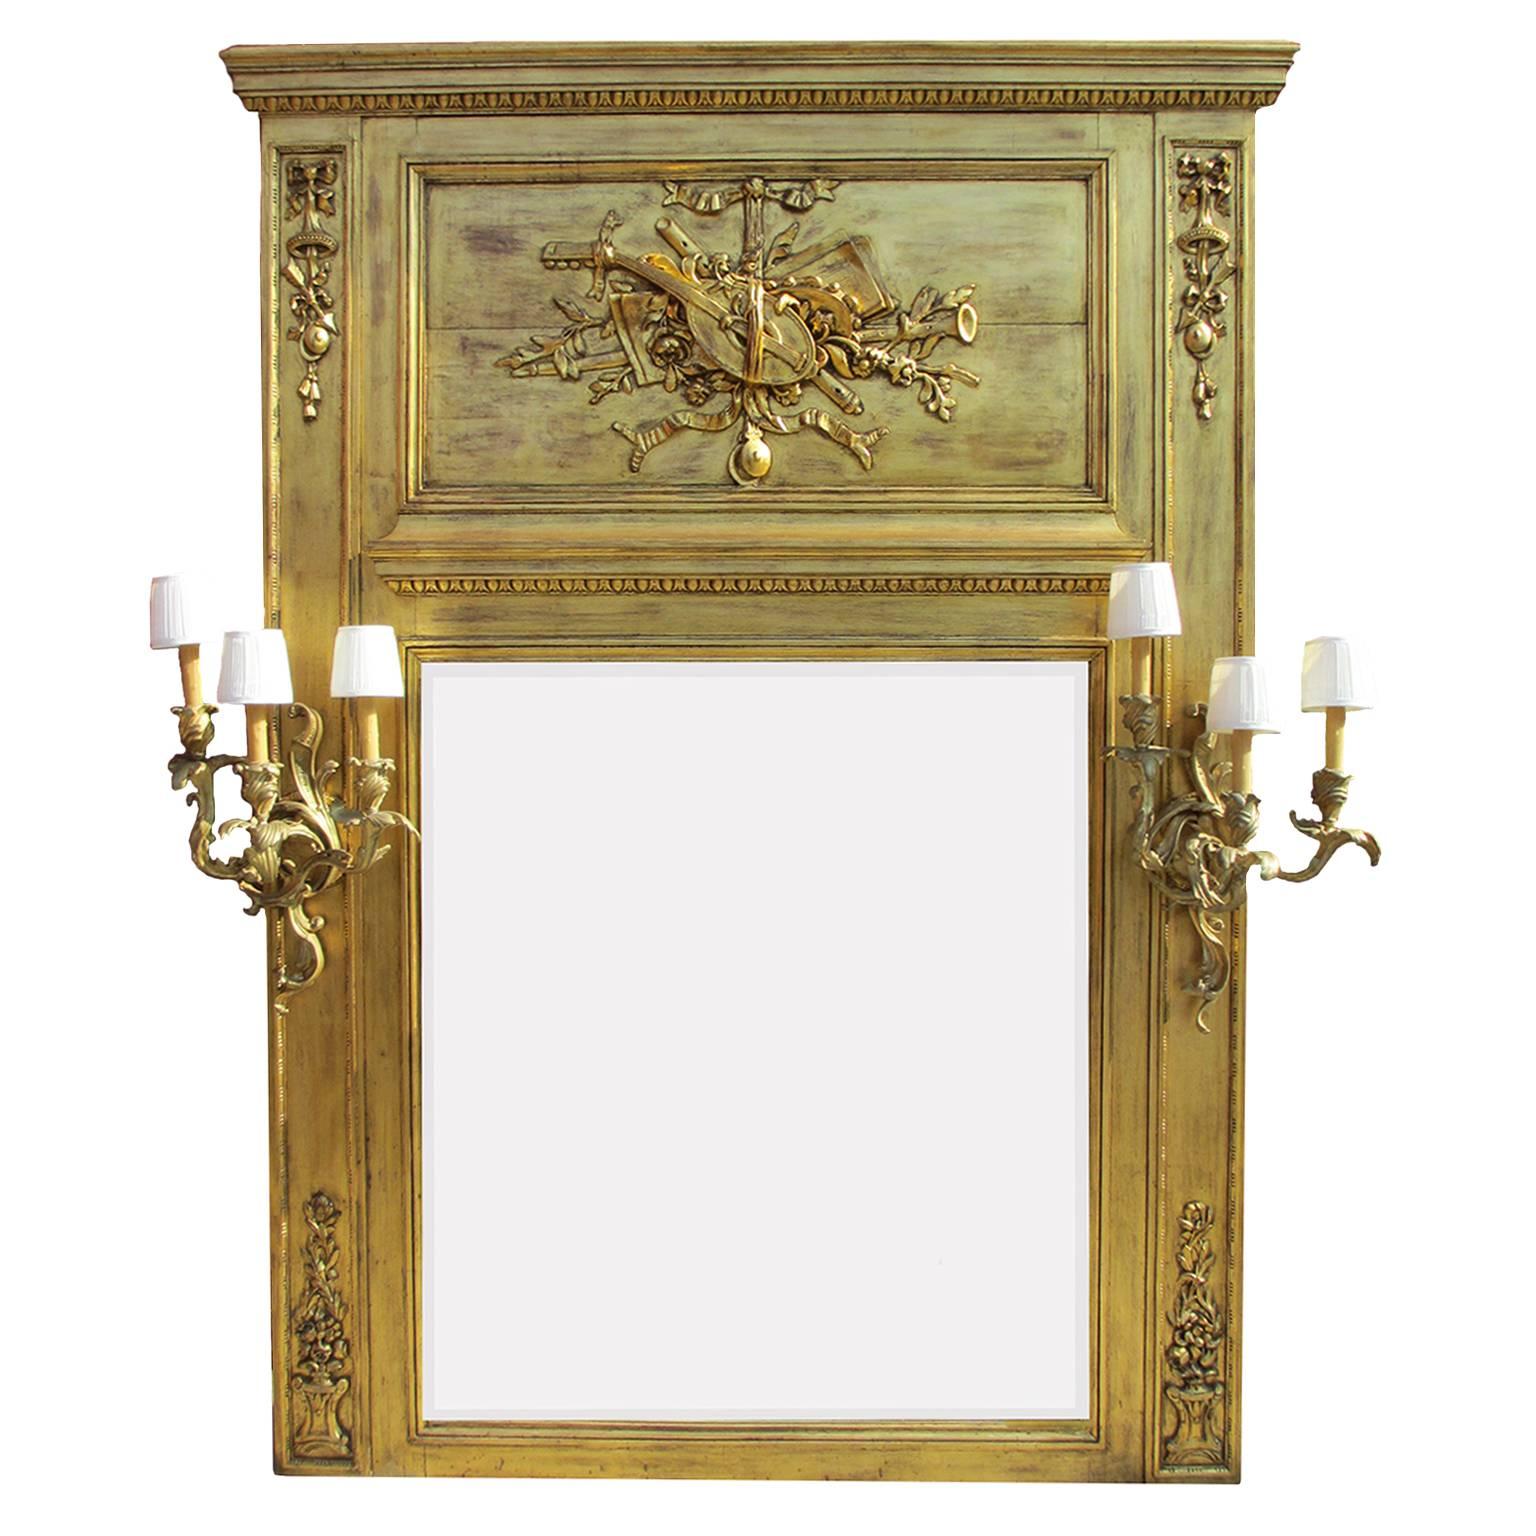 French 19th-20th Century Louis XV Style Giltwood Carved Trumeau Mirror Frame